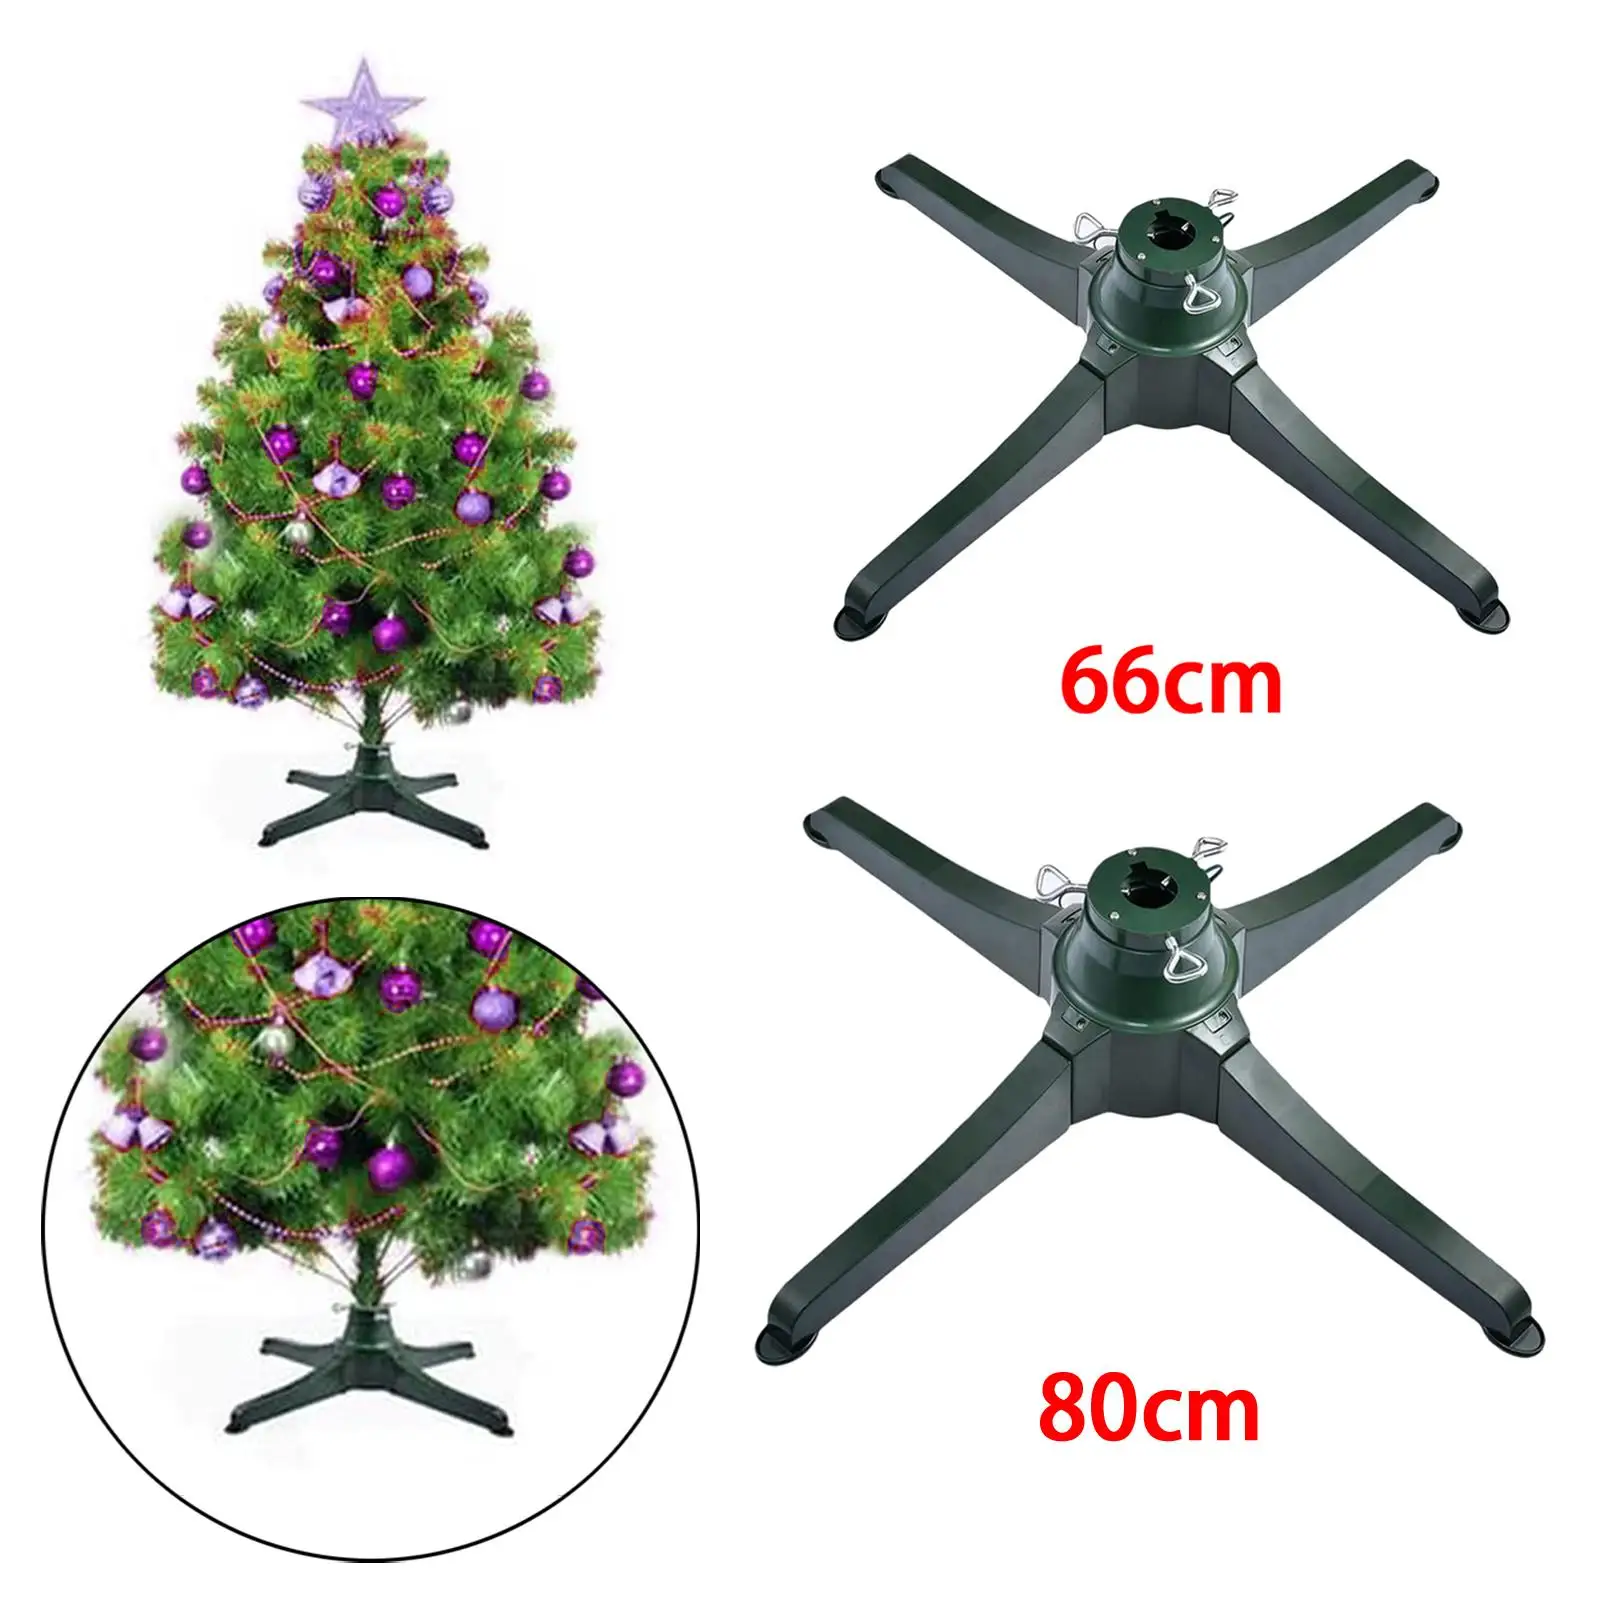 Rotating Christmas  Artificial  Trees Holder Universal Adjustable  Compatible with Most Upright Tree